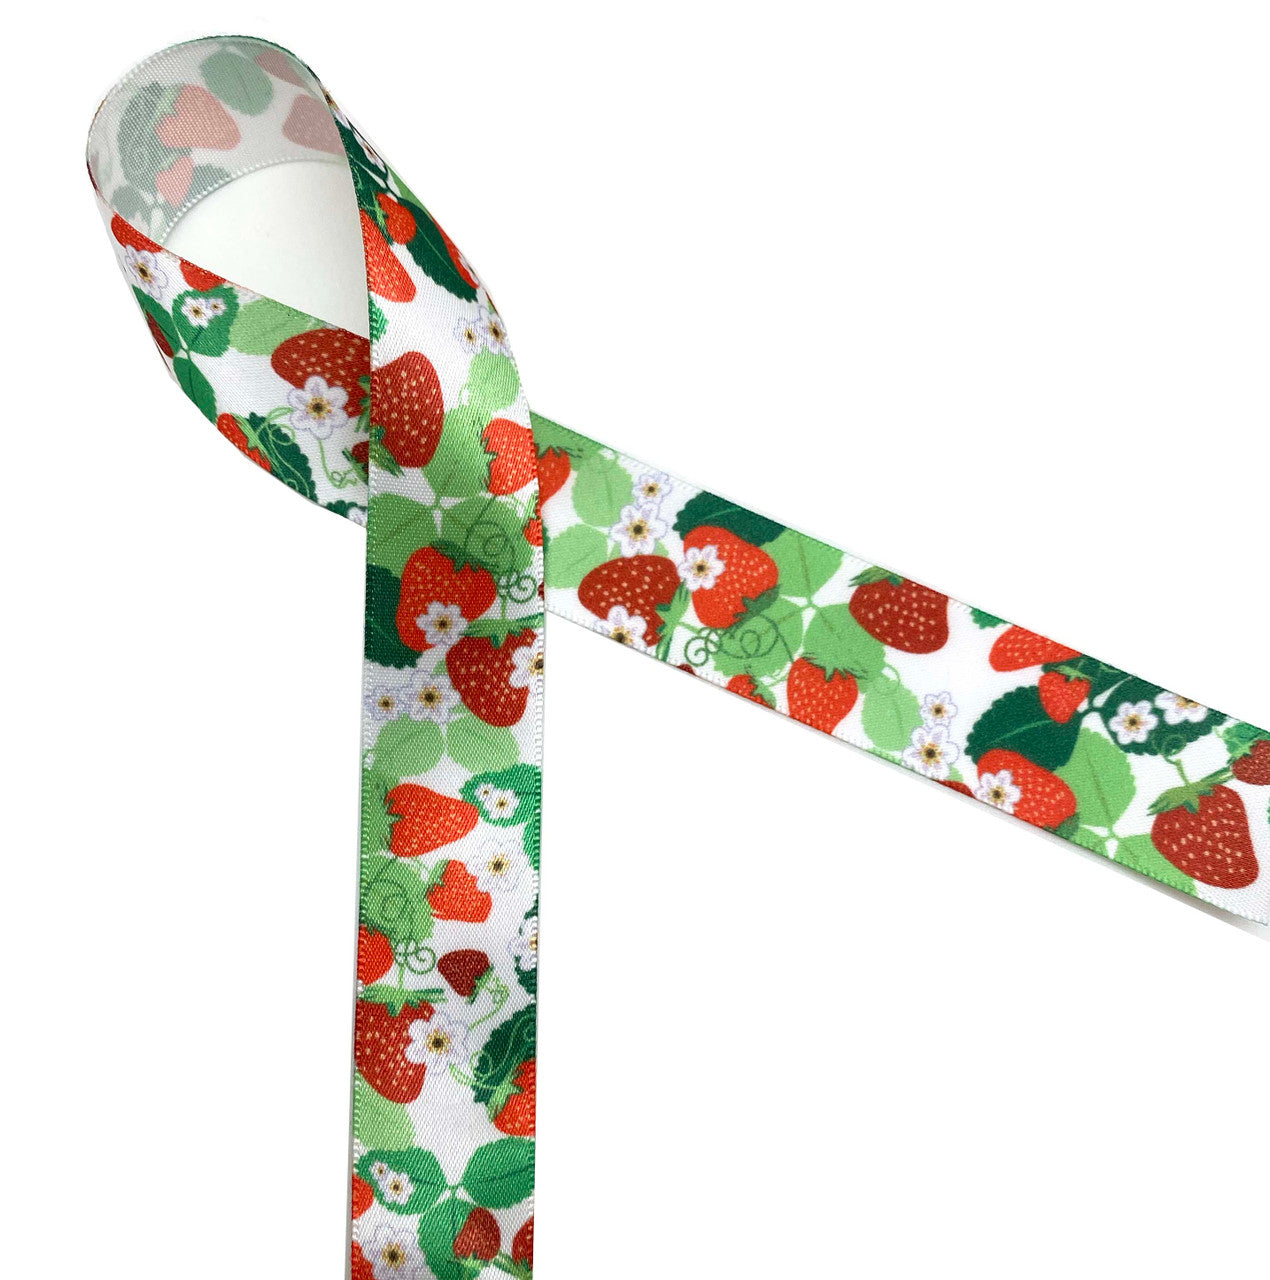 Strawberries  Ribbon with a white background on 7/8" White Single Face Satin Ribbon